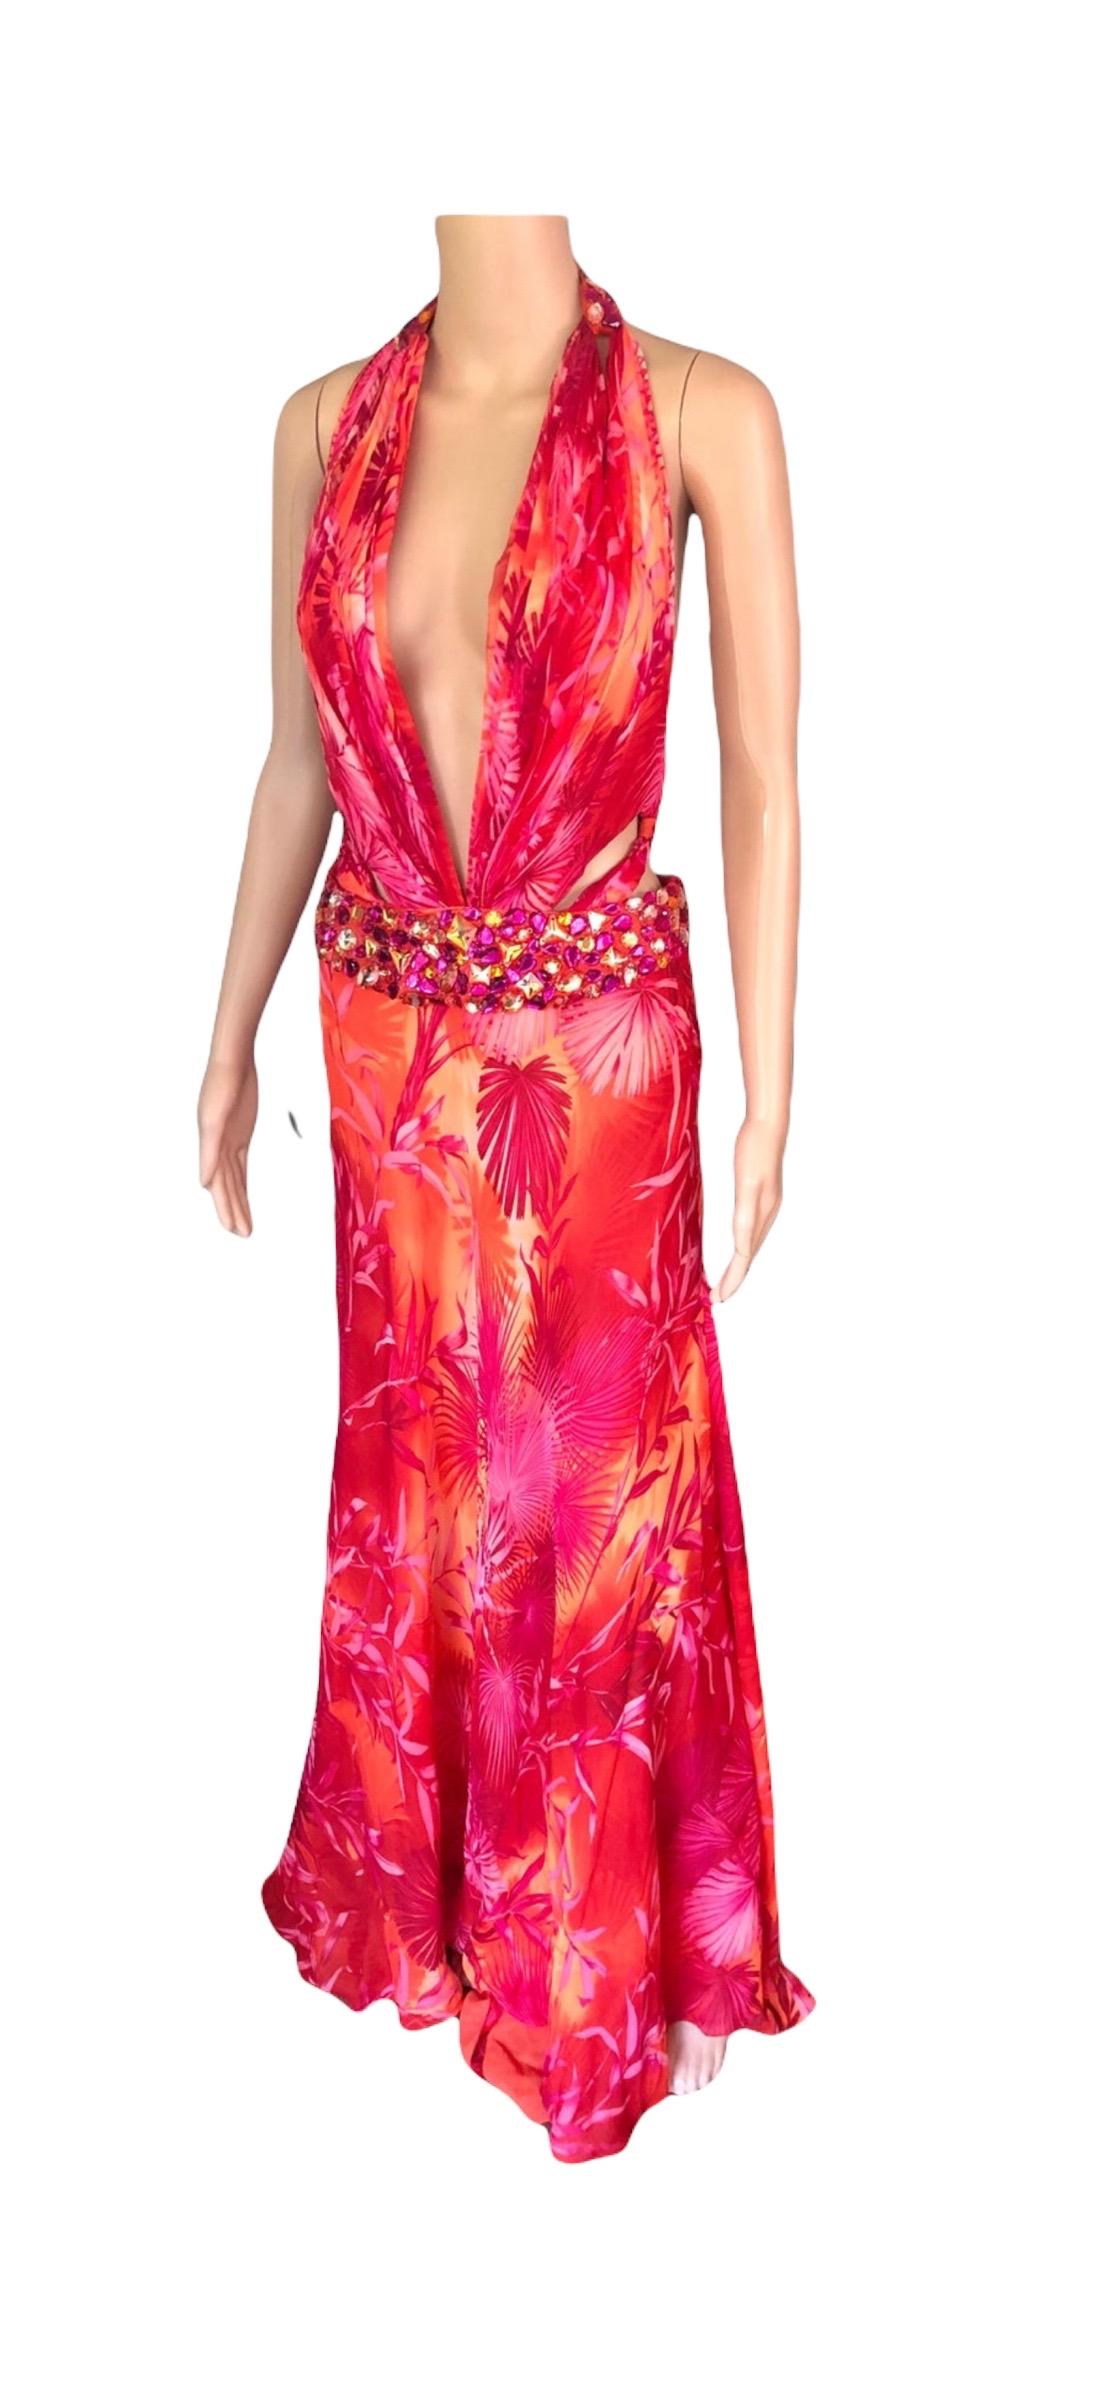 Gianni Versace Couture S/S 2000 Runway Finalee Vintage Embellished Cutout Tropical Jungle Print Evening Dress Gown IT 40

Gianni Versace Couture vintage pink, red, orange jungle tropical palm print embellished cutout dress featuring embellished